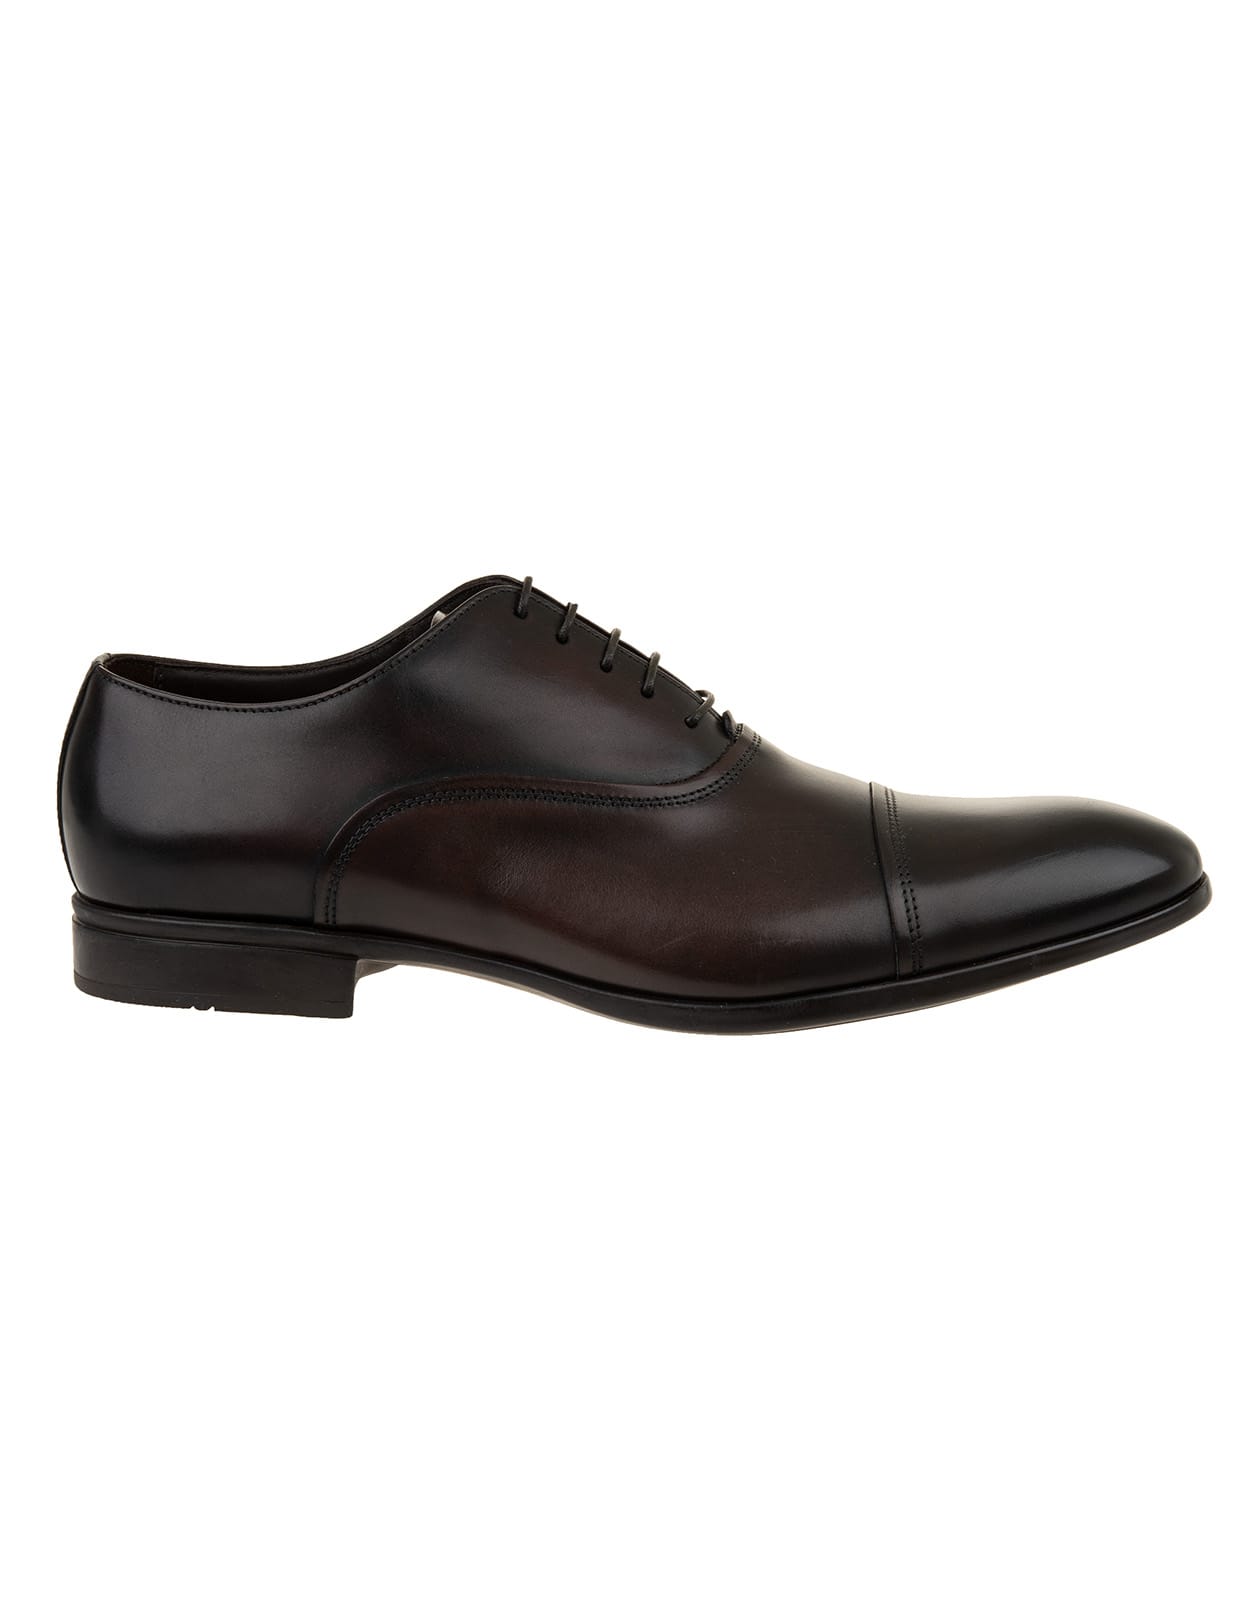 Doucals Man Oxford Lace-up Shoe In Smooth Dark Brown Leather